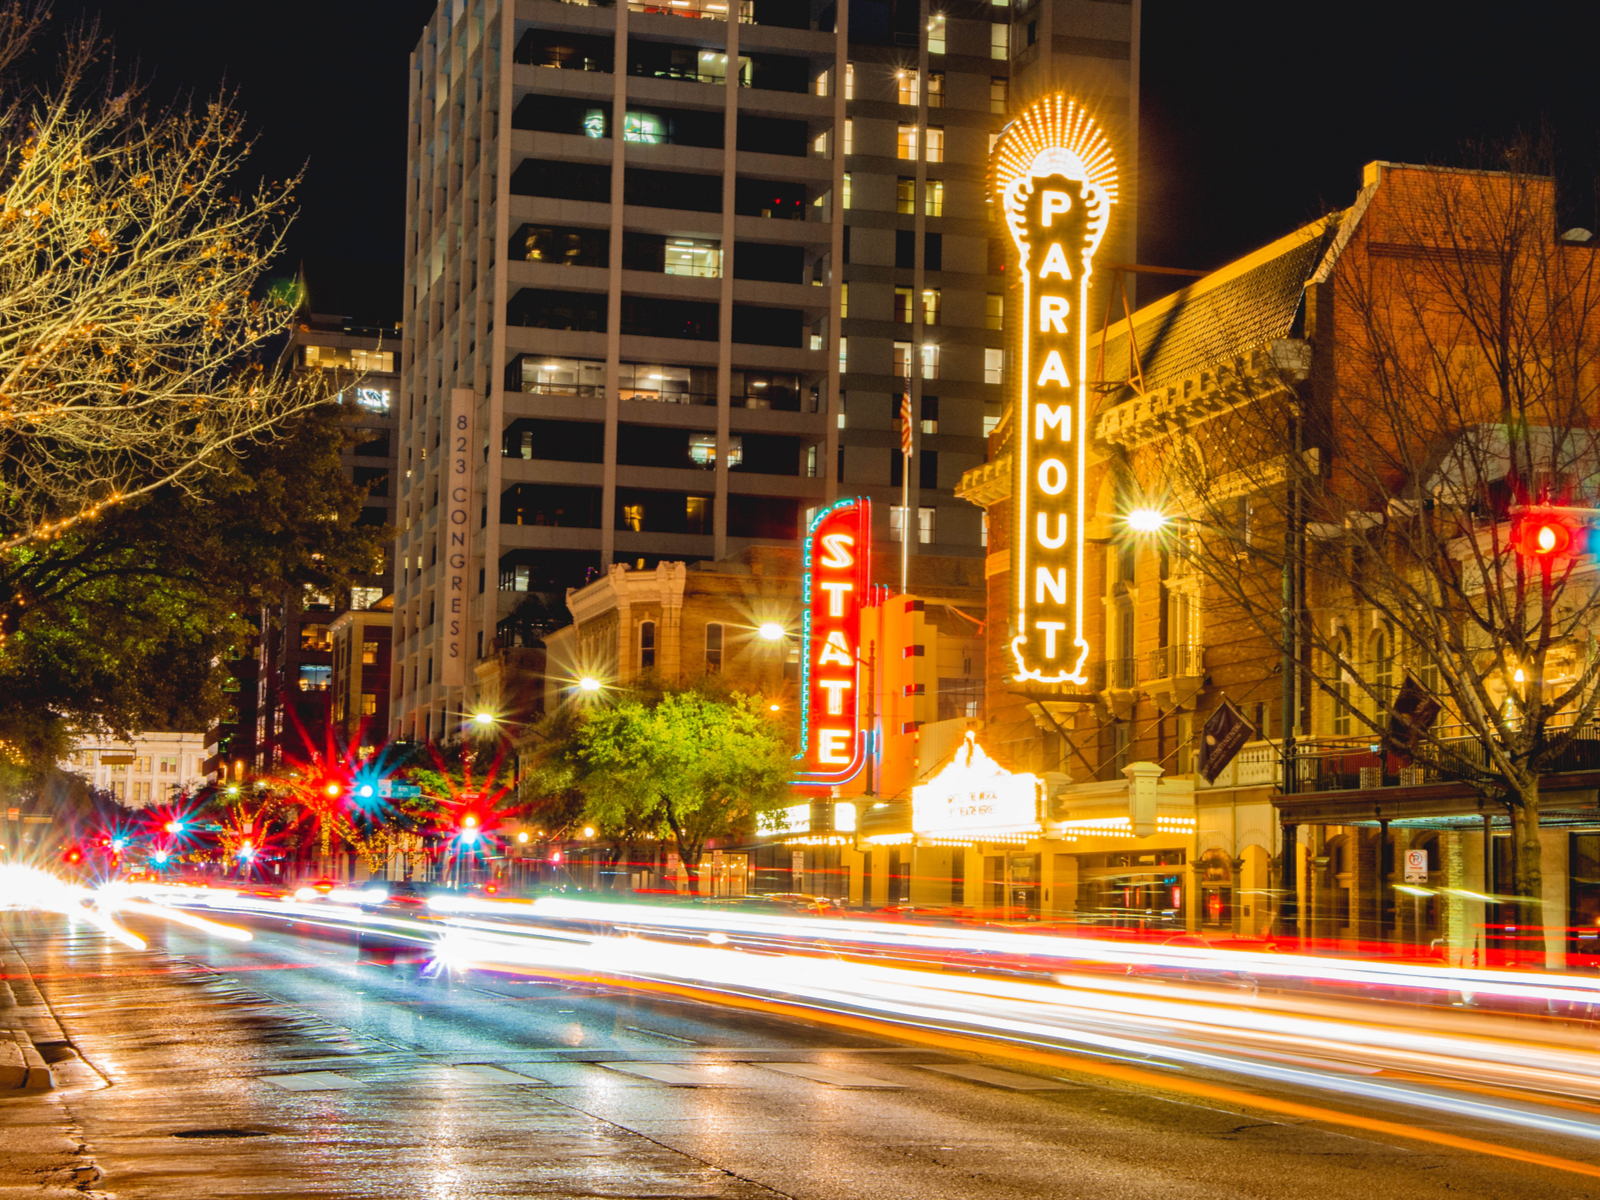 Long exposure of traffic on a downtown street pictured during the cheapest time to visit Austin